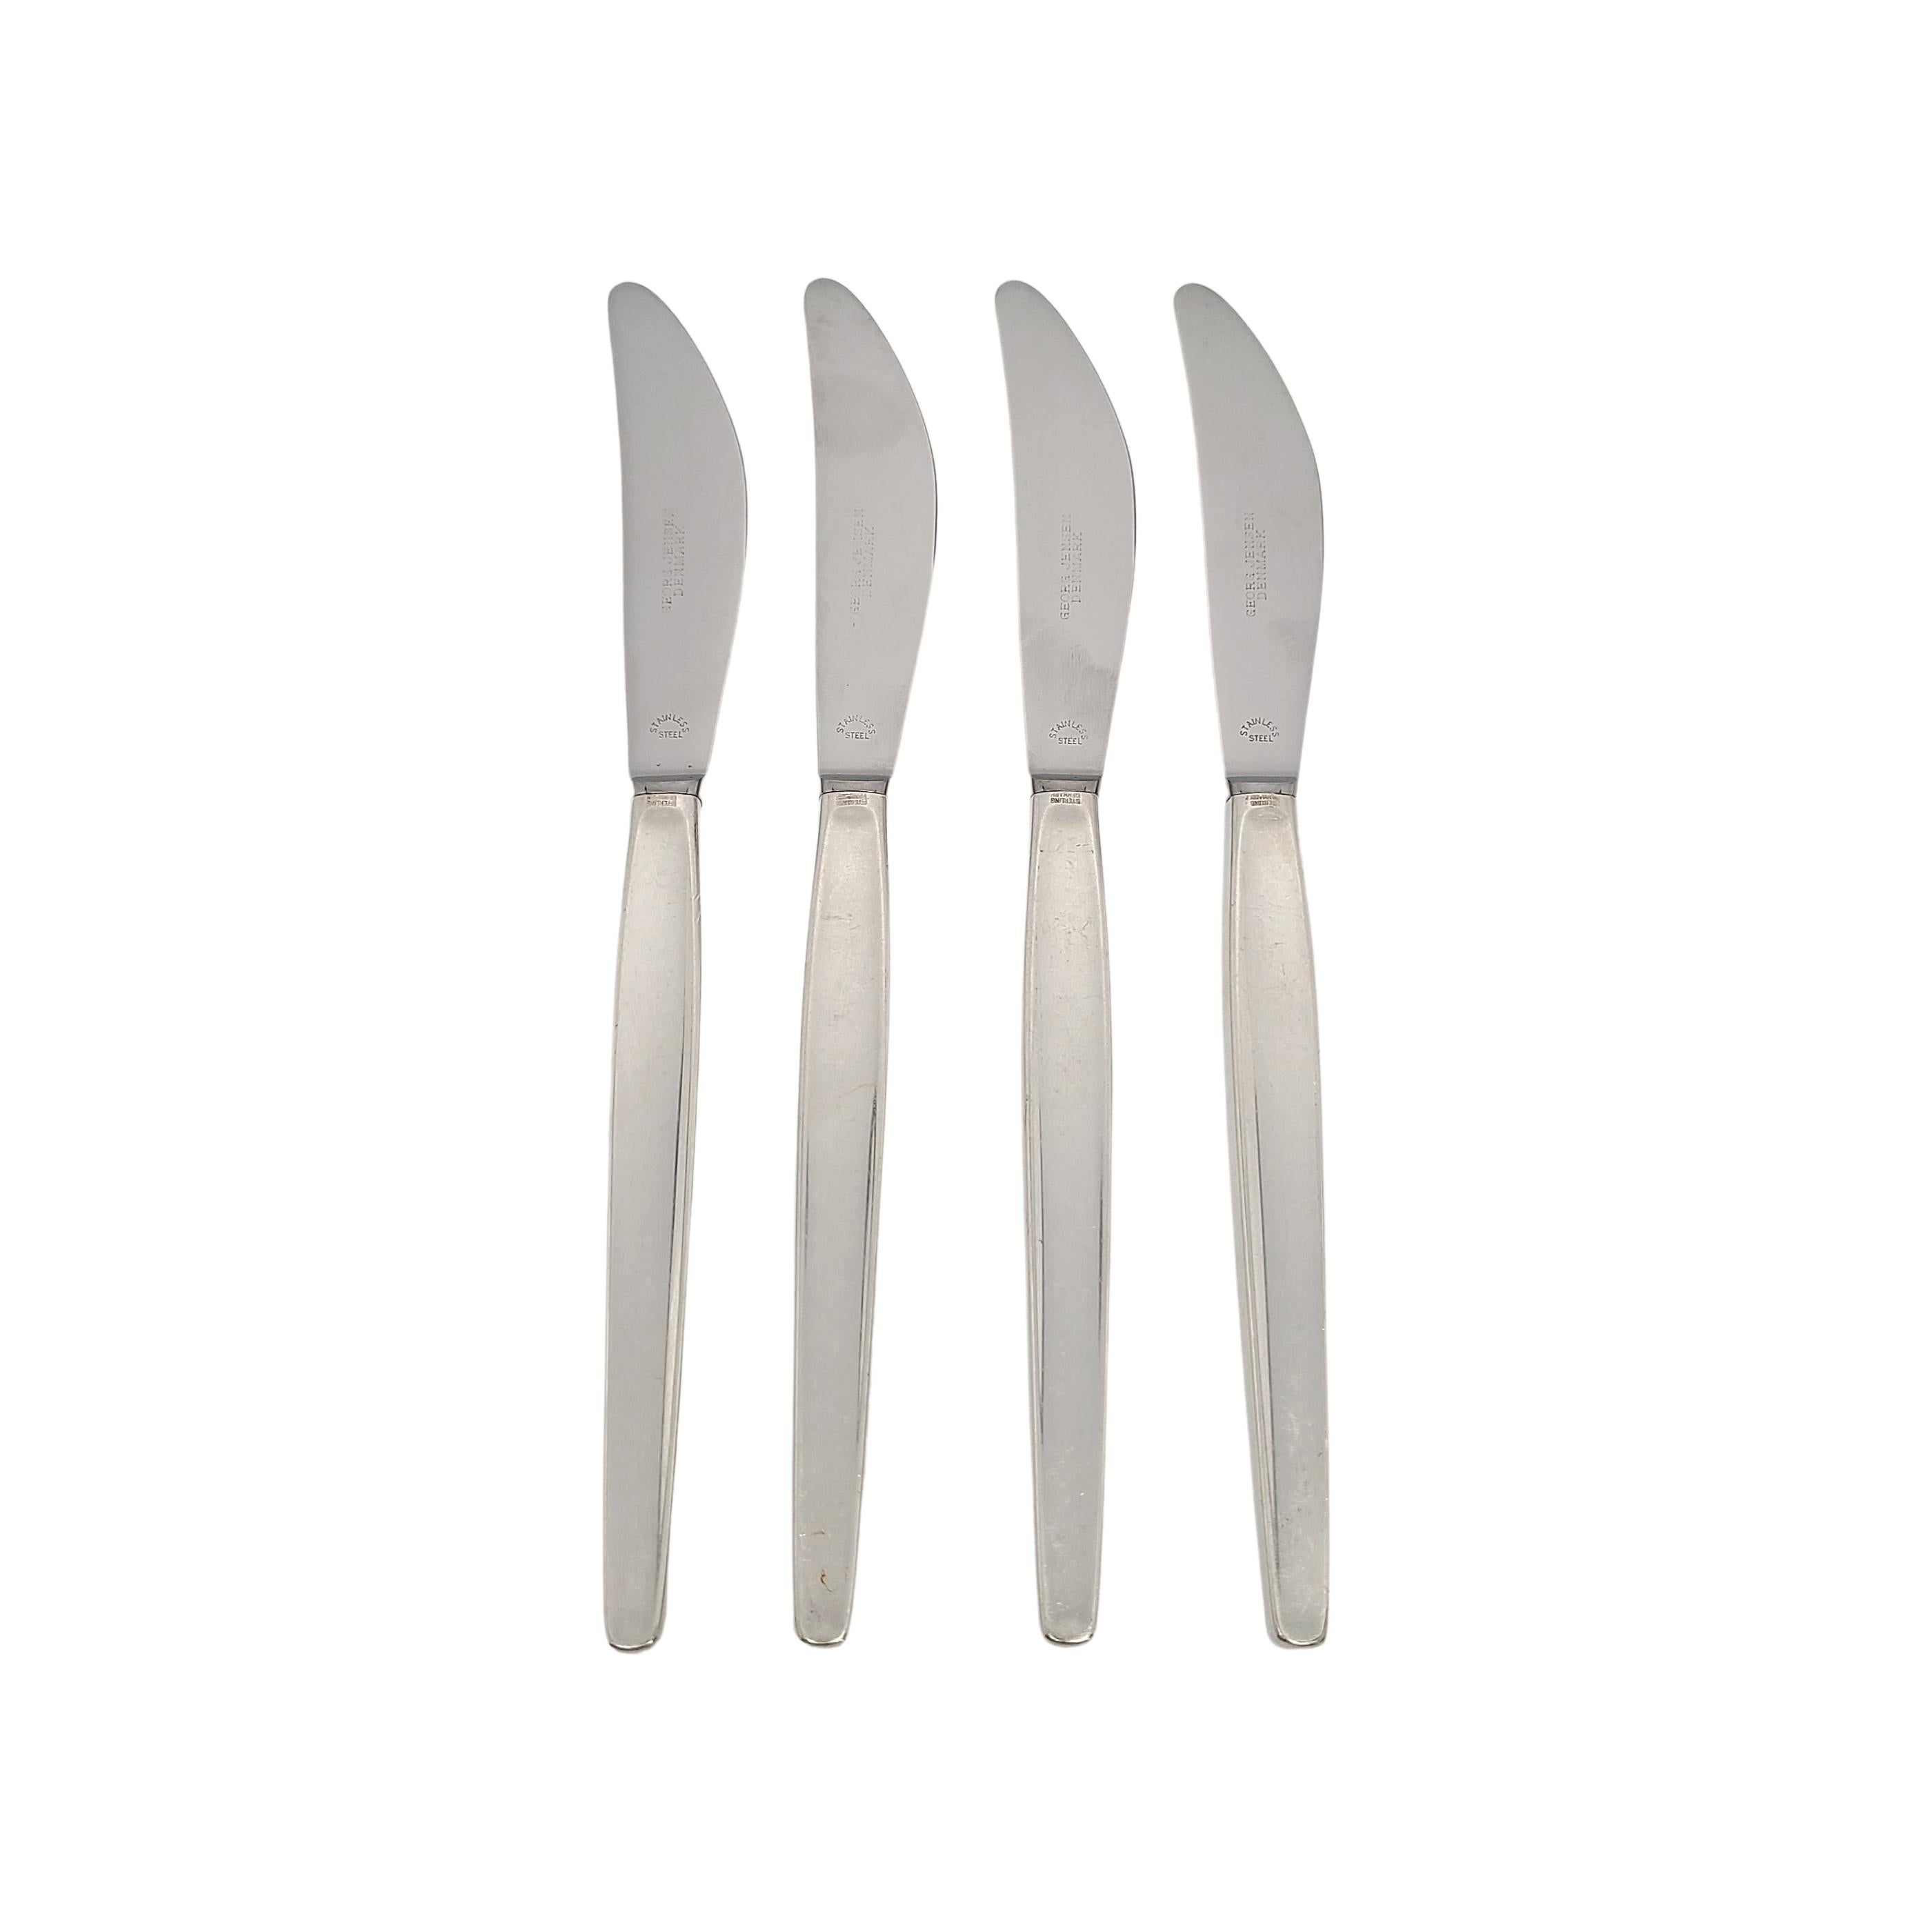 Set of 4 sterling silver dinner knives in the Cypress pattern by Georg Jensen

The Cypress pattern was designed by Tias Eckhoff in 1953 and won a gold medal for design in 1954. Its mid-century design is a timeless classic.

Measures approx 8 7/8